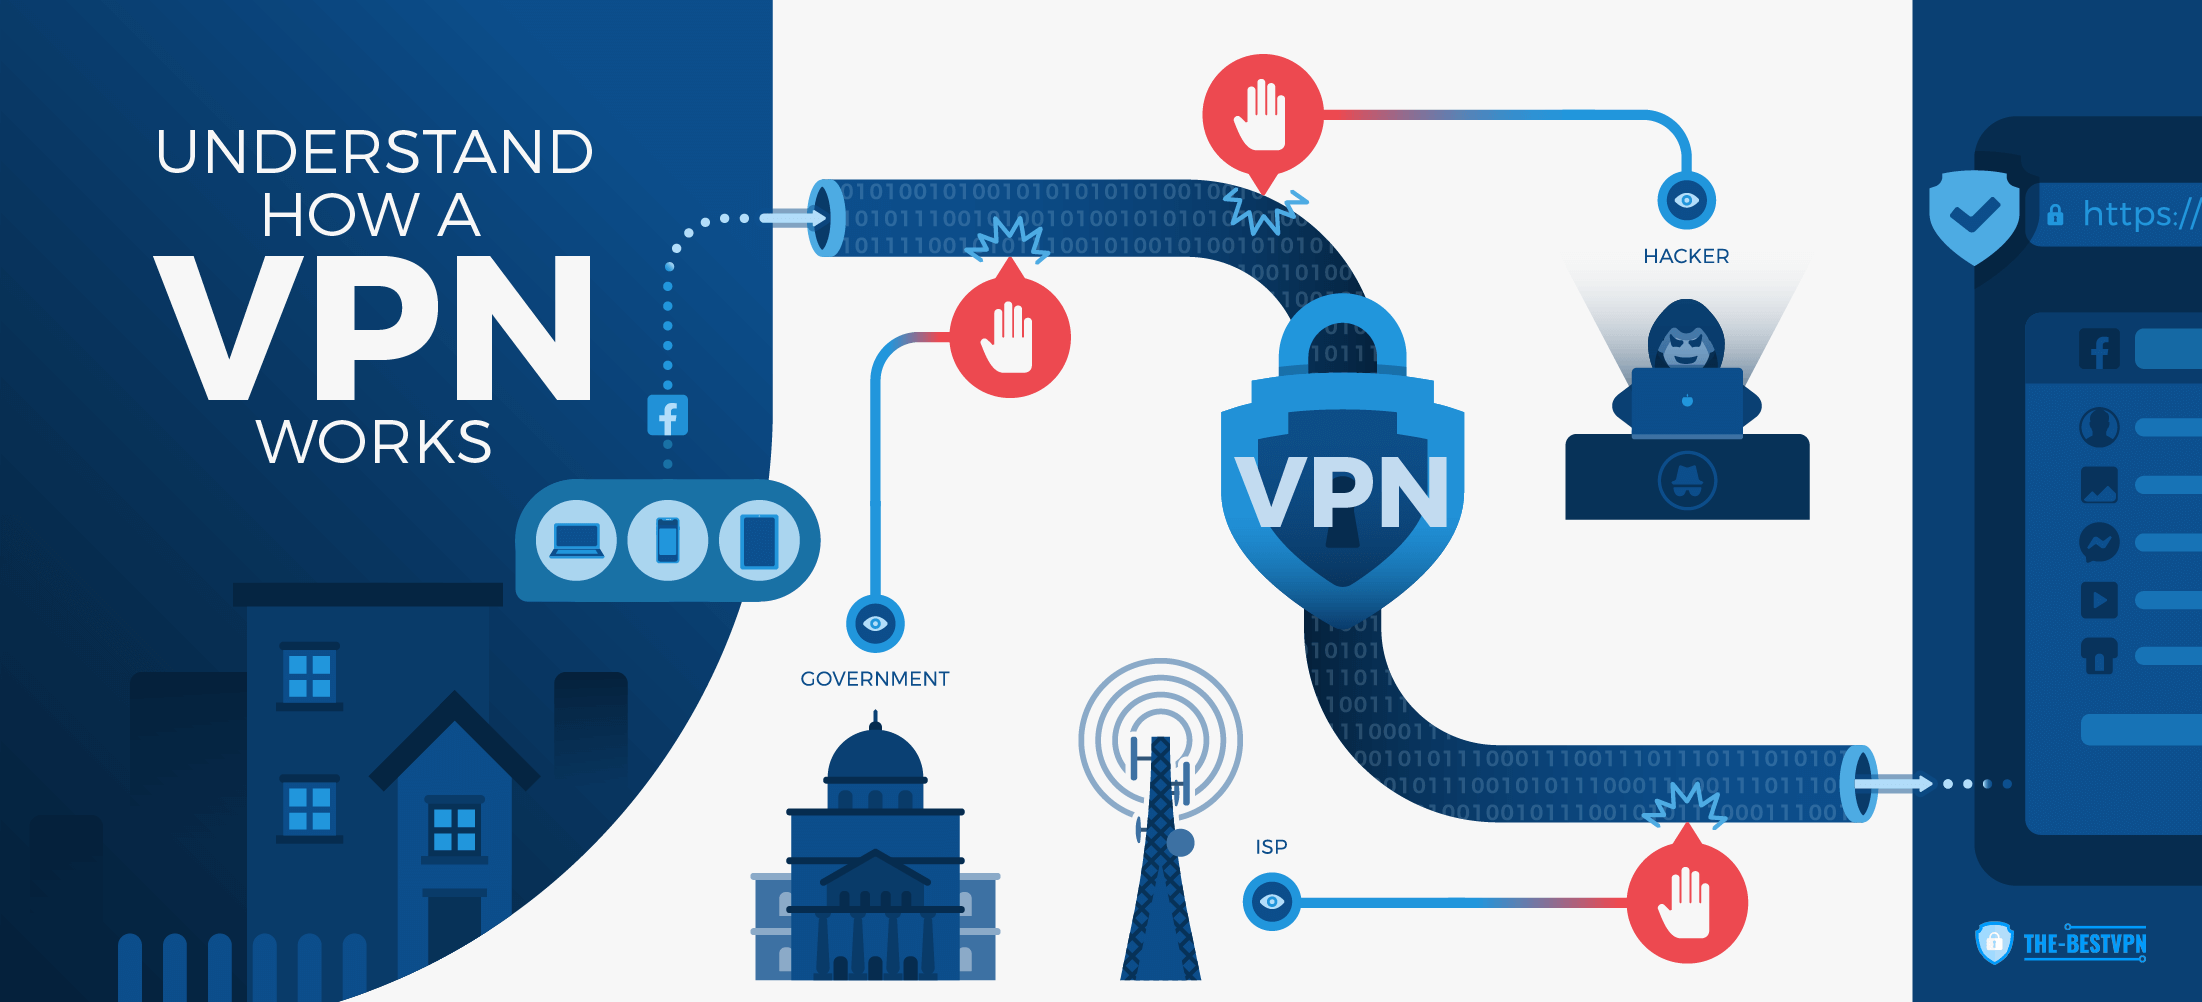 does a vpn use your data